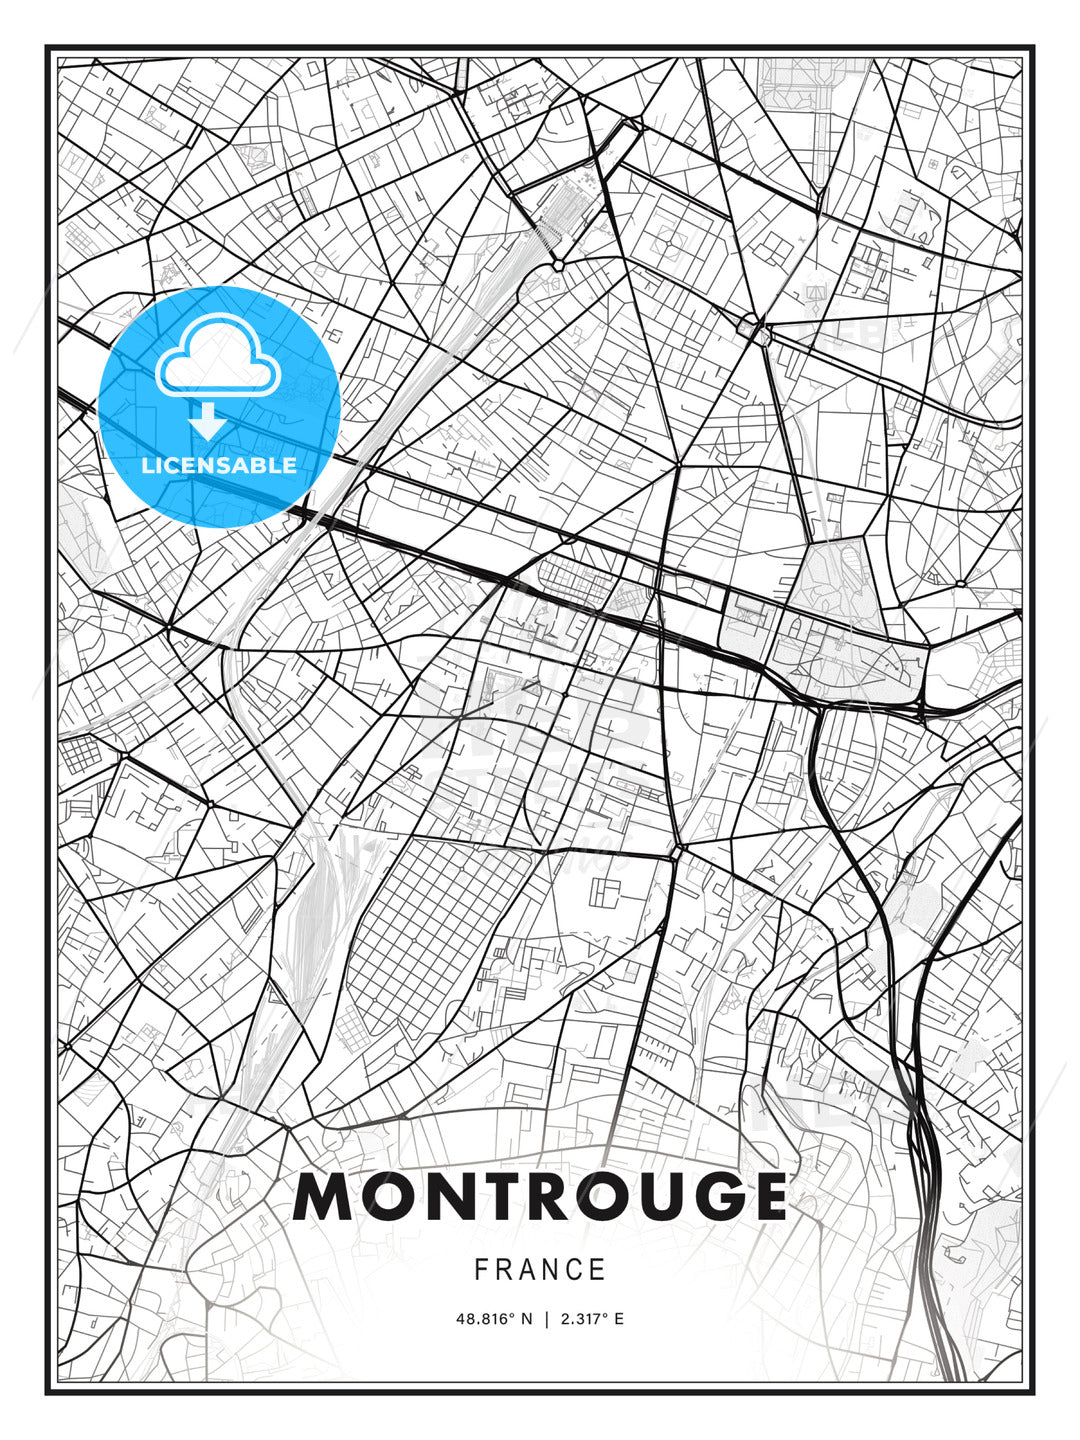 Montrouge, France, Modern Print Template in Various Formats - HEBSTREITS Sketches